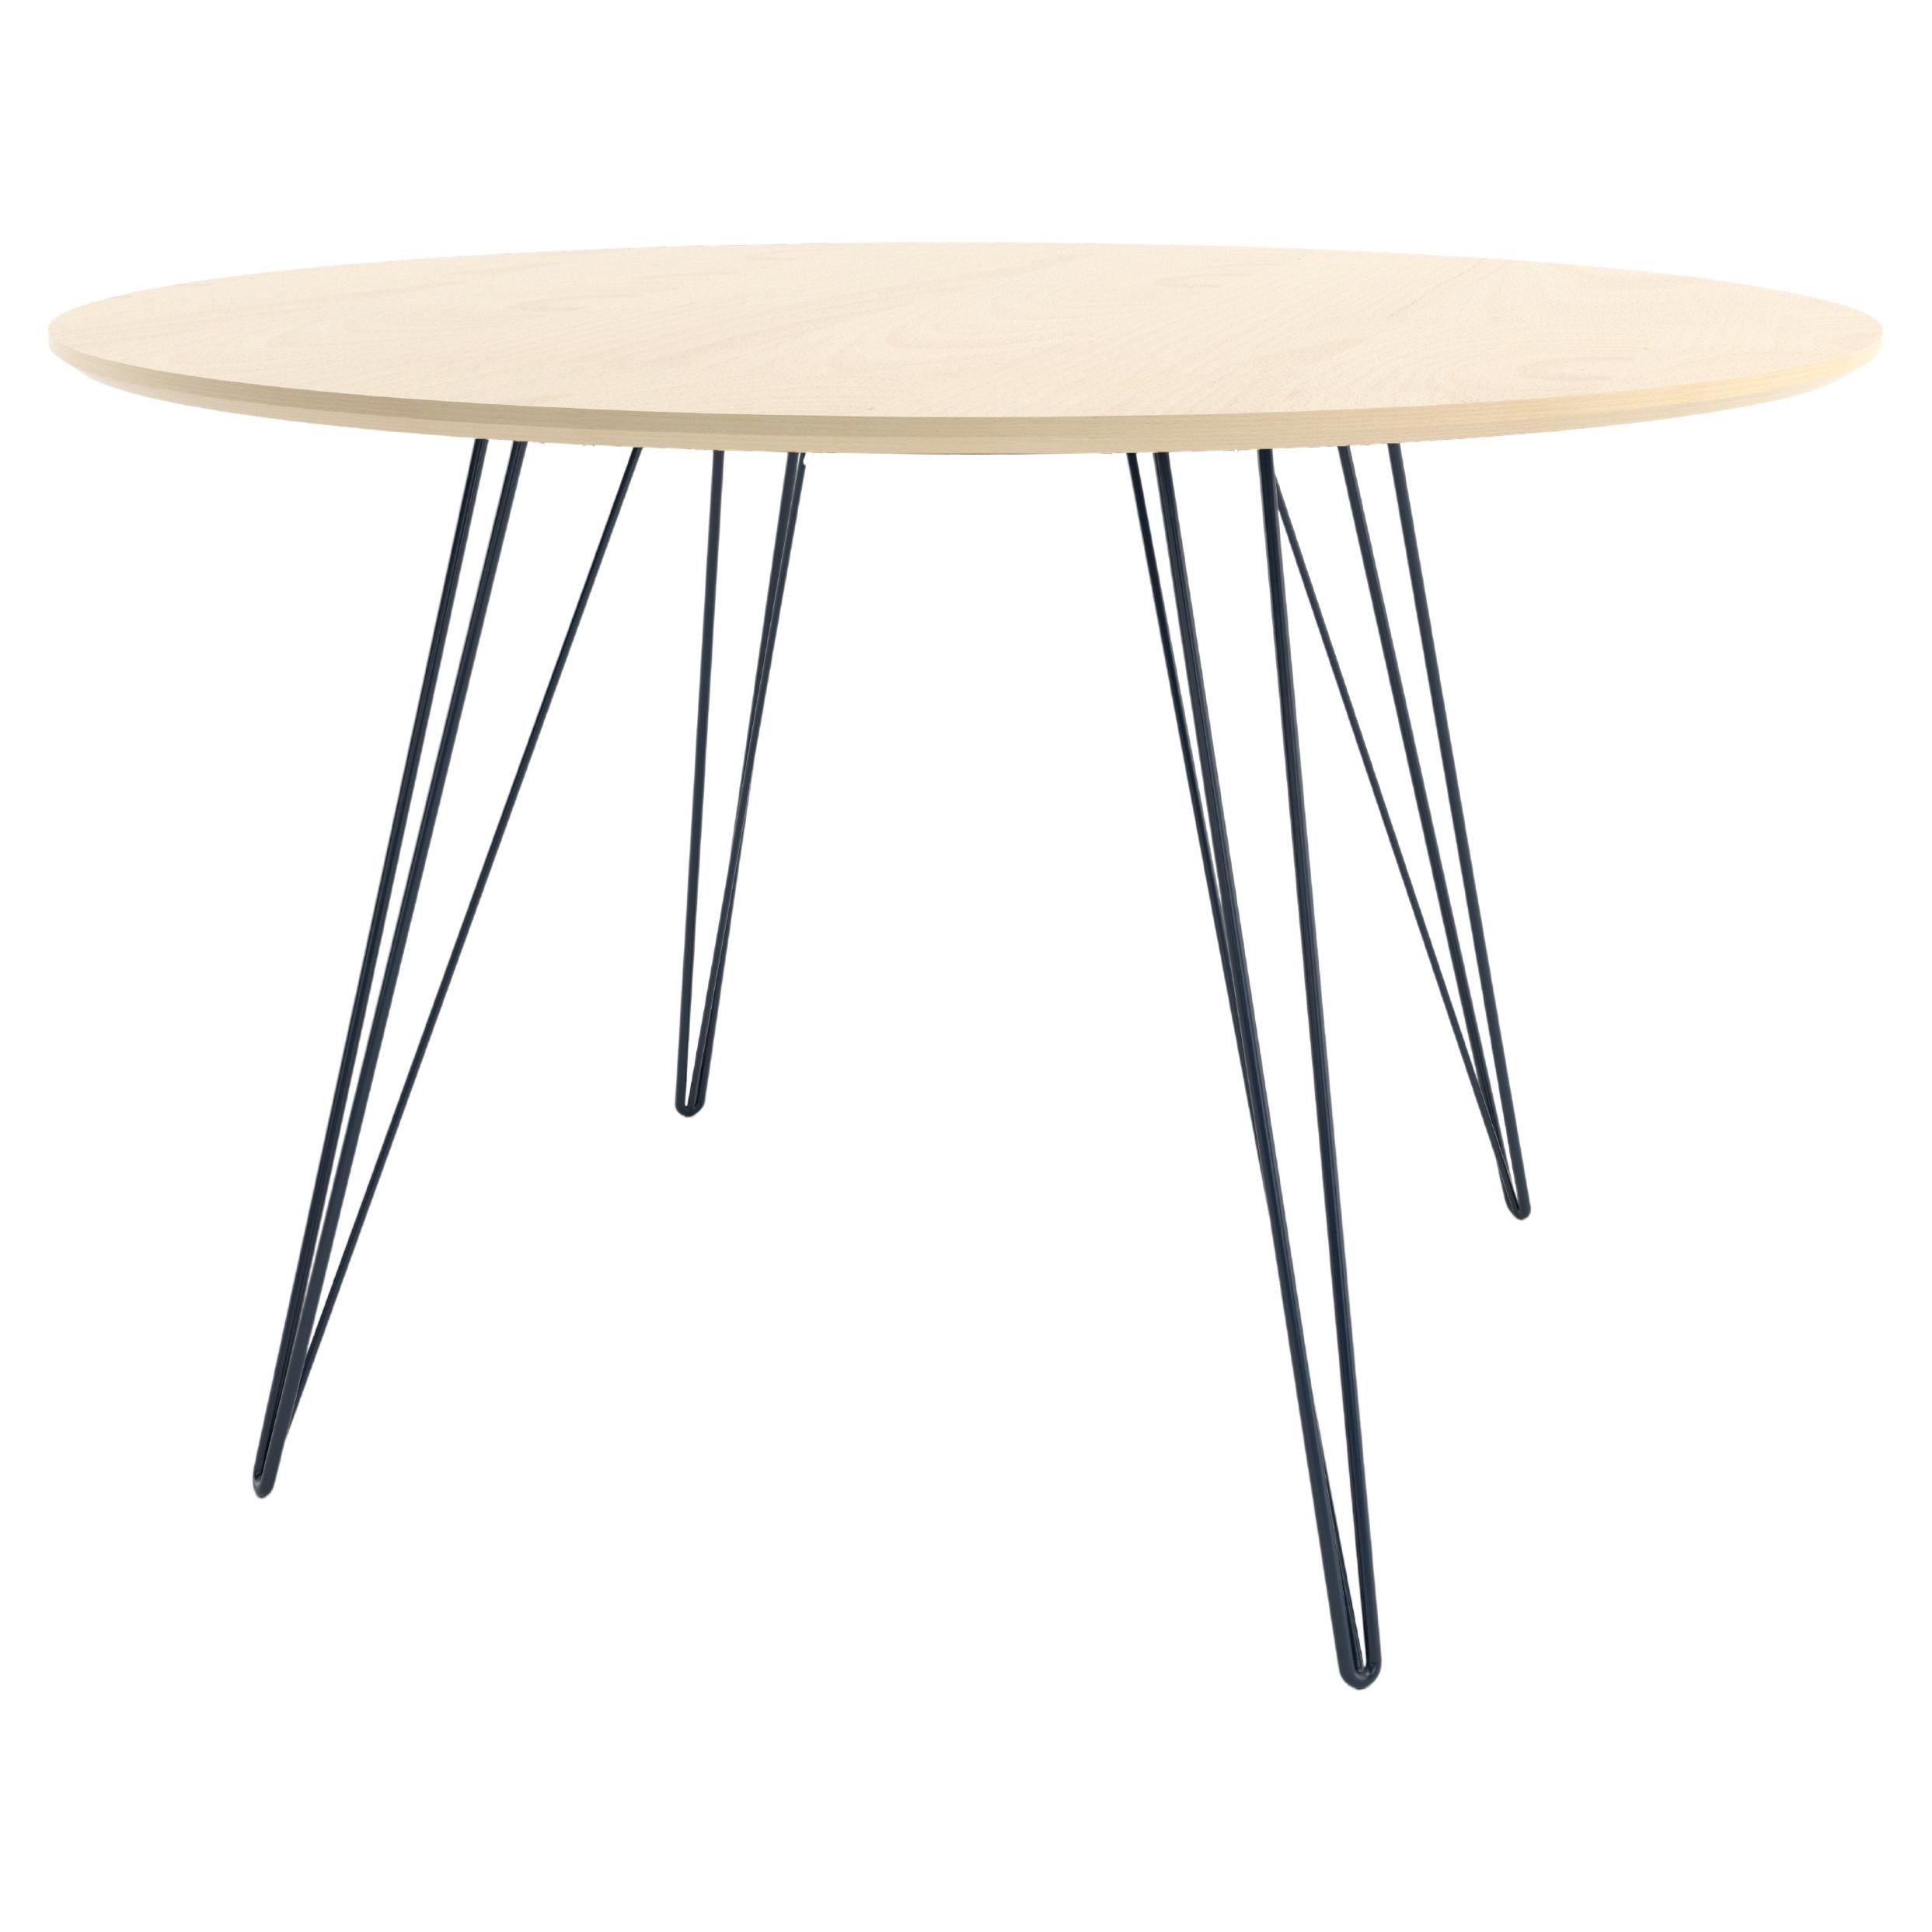 Maple Williams Dining Table Navy Hairpin Legs Oval Top